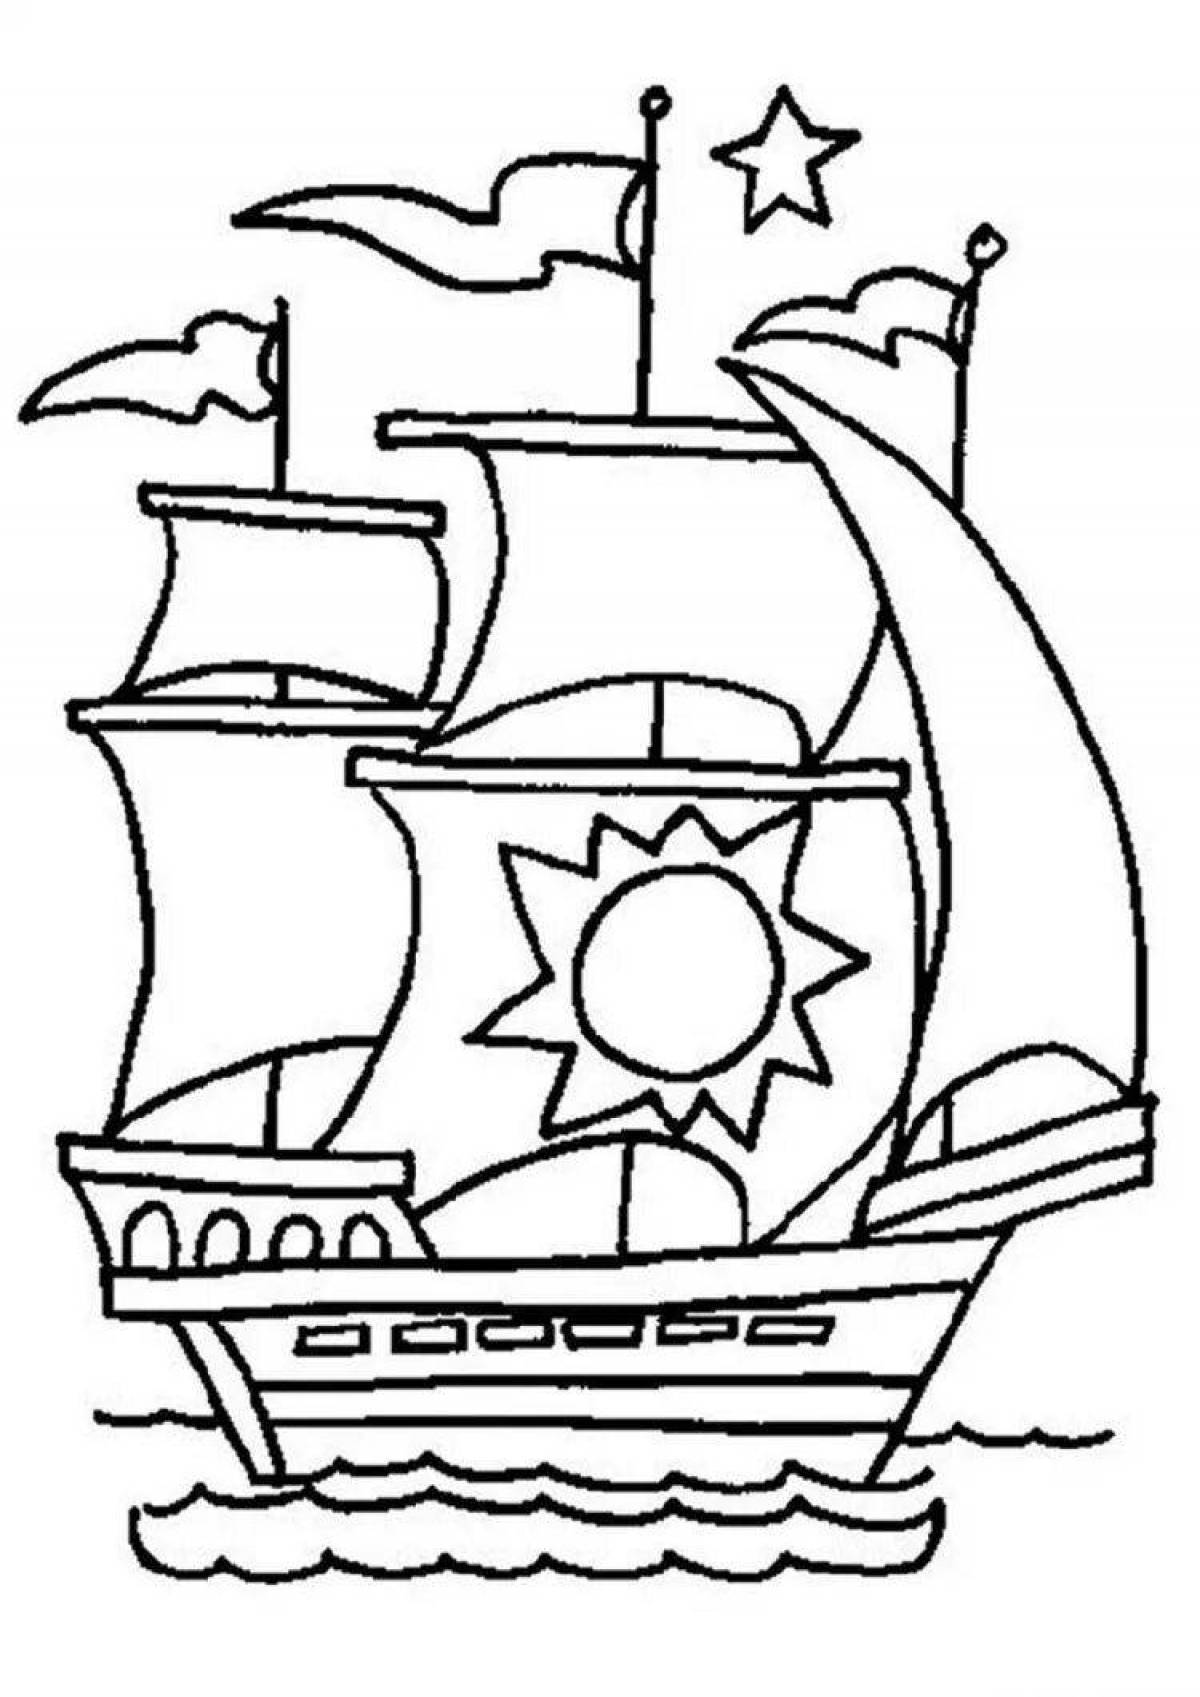 1st grade boy coloring pages obsessed with colors